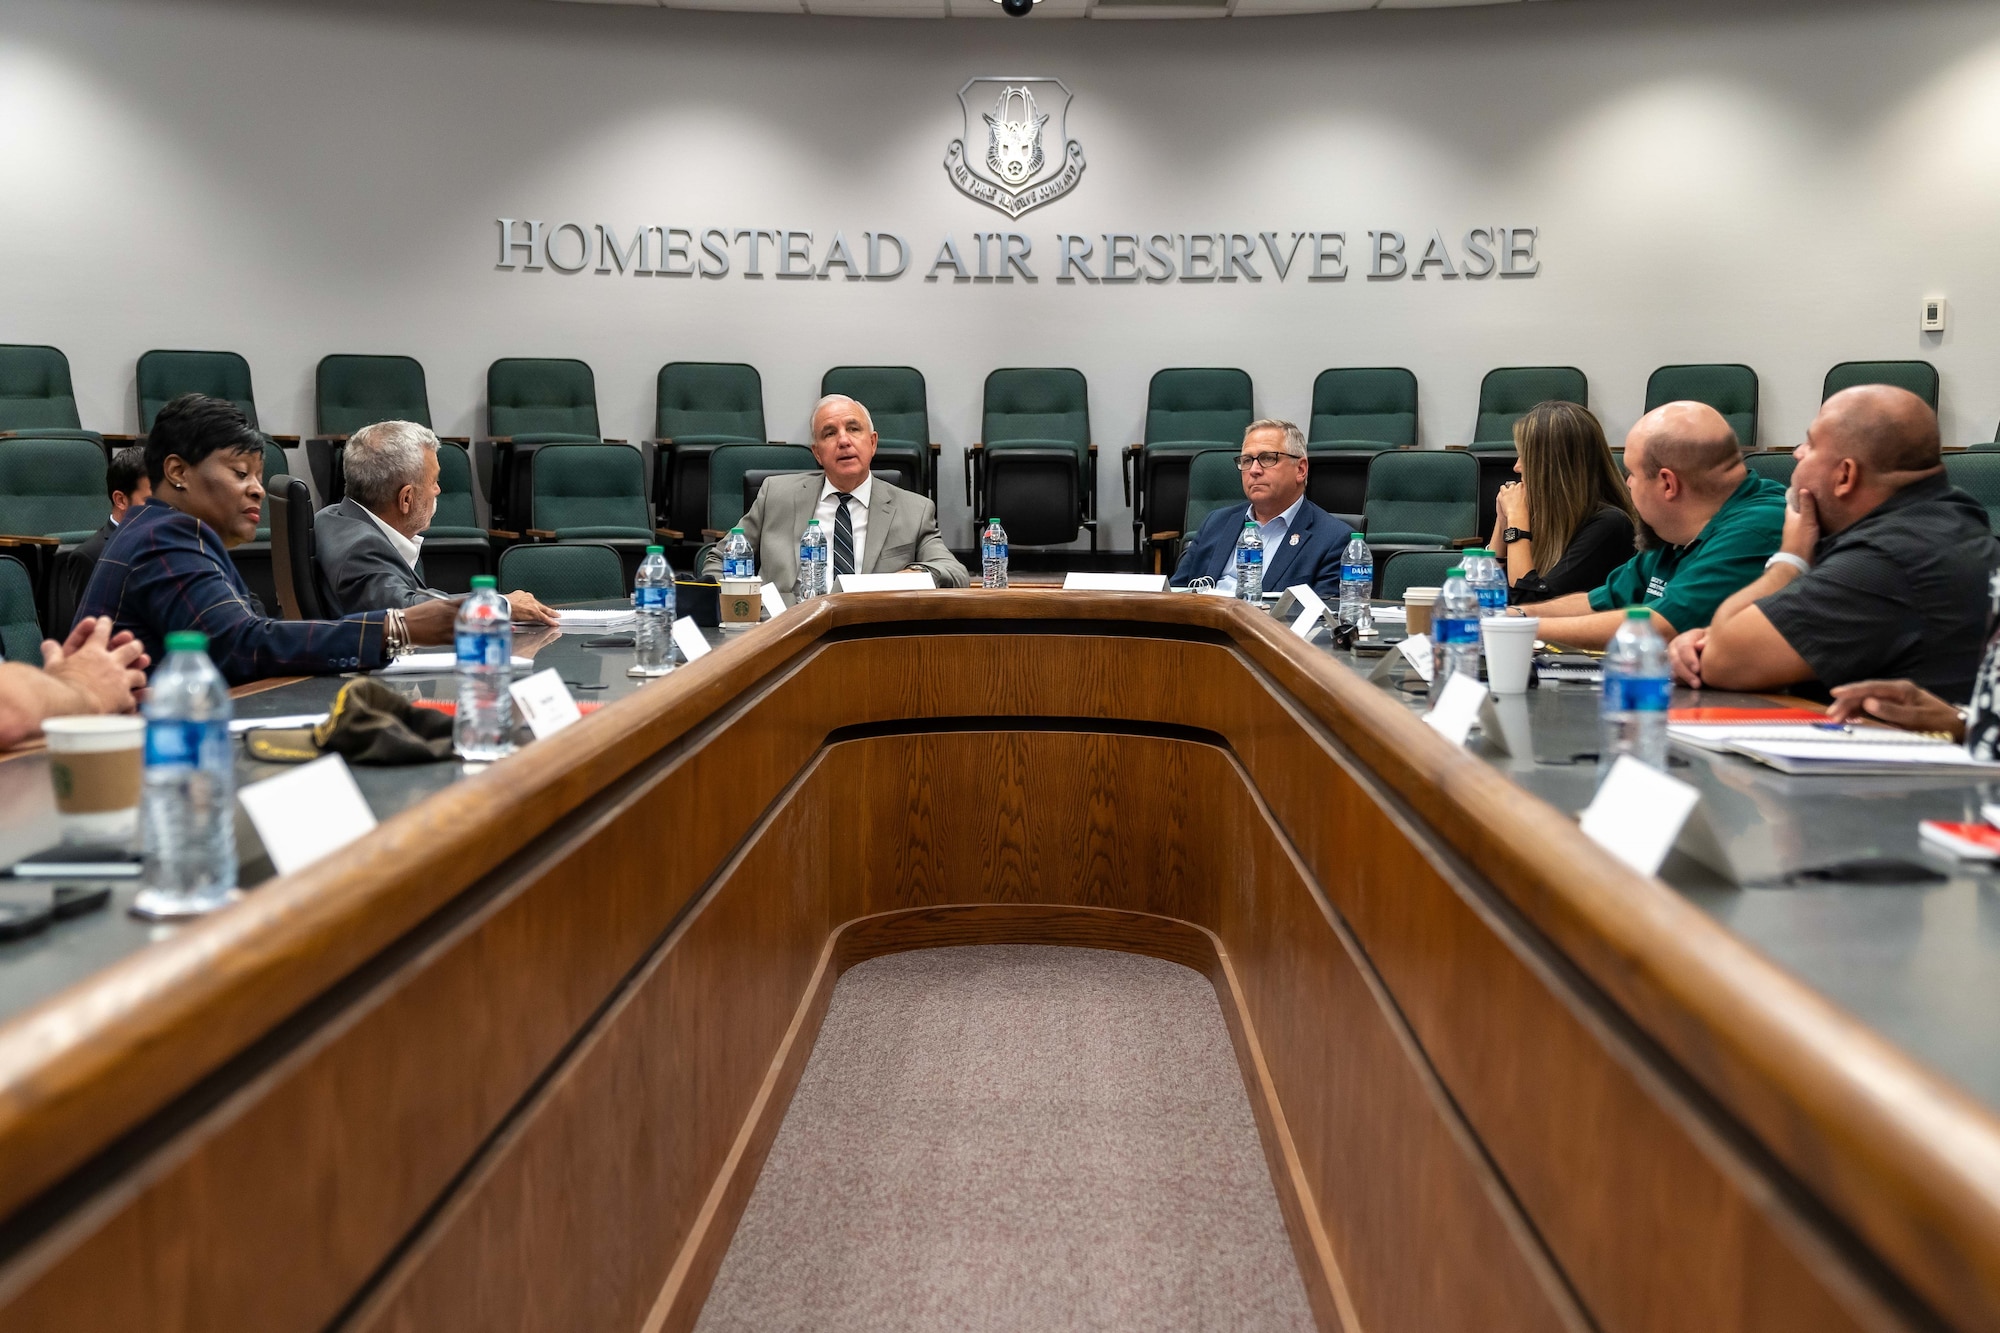 Ranking Member of the House Committee on Veterans Affairs, Rep. Mike Bost, of Illinois, right, and Rep. Carlos Gimenez of Florida at Homestead Air Reserve Base, Fla., conduct a roundtable discussion with representatives from South Florida veteran affairs organizations on June 1, 2022.(U.S. Air Force photo by Tech. Sgt. Leo Castellano)